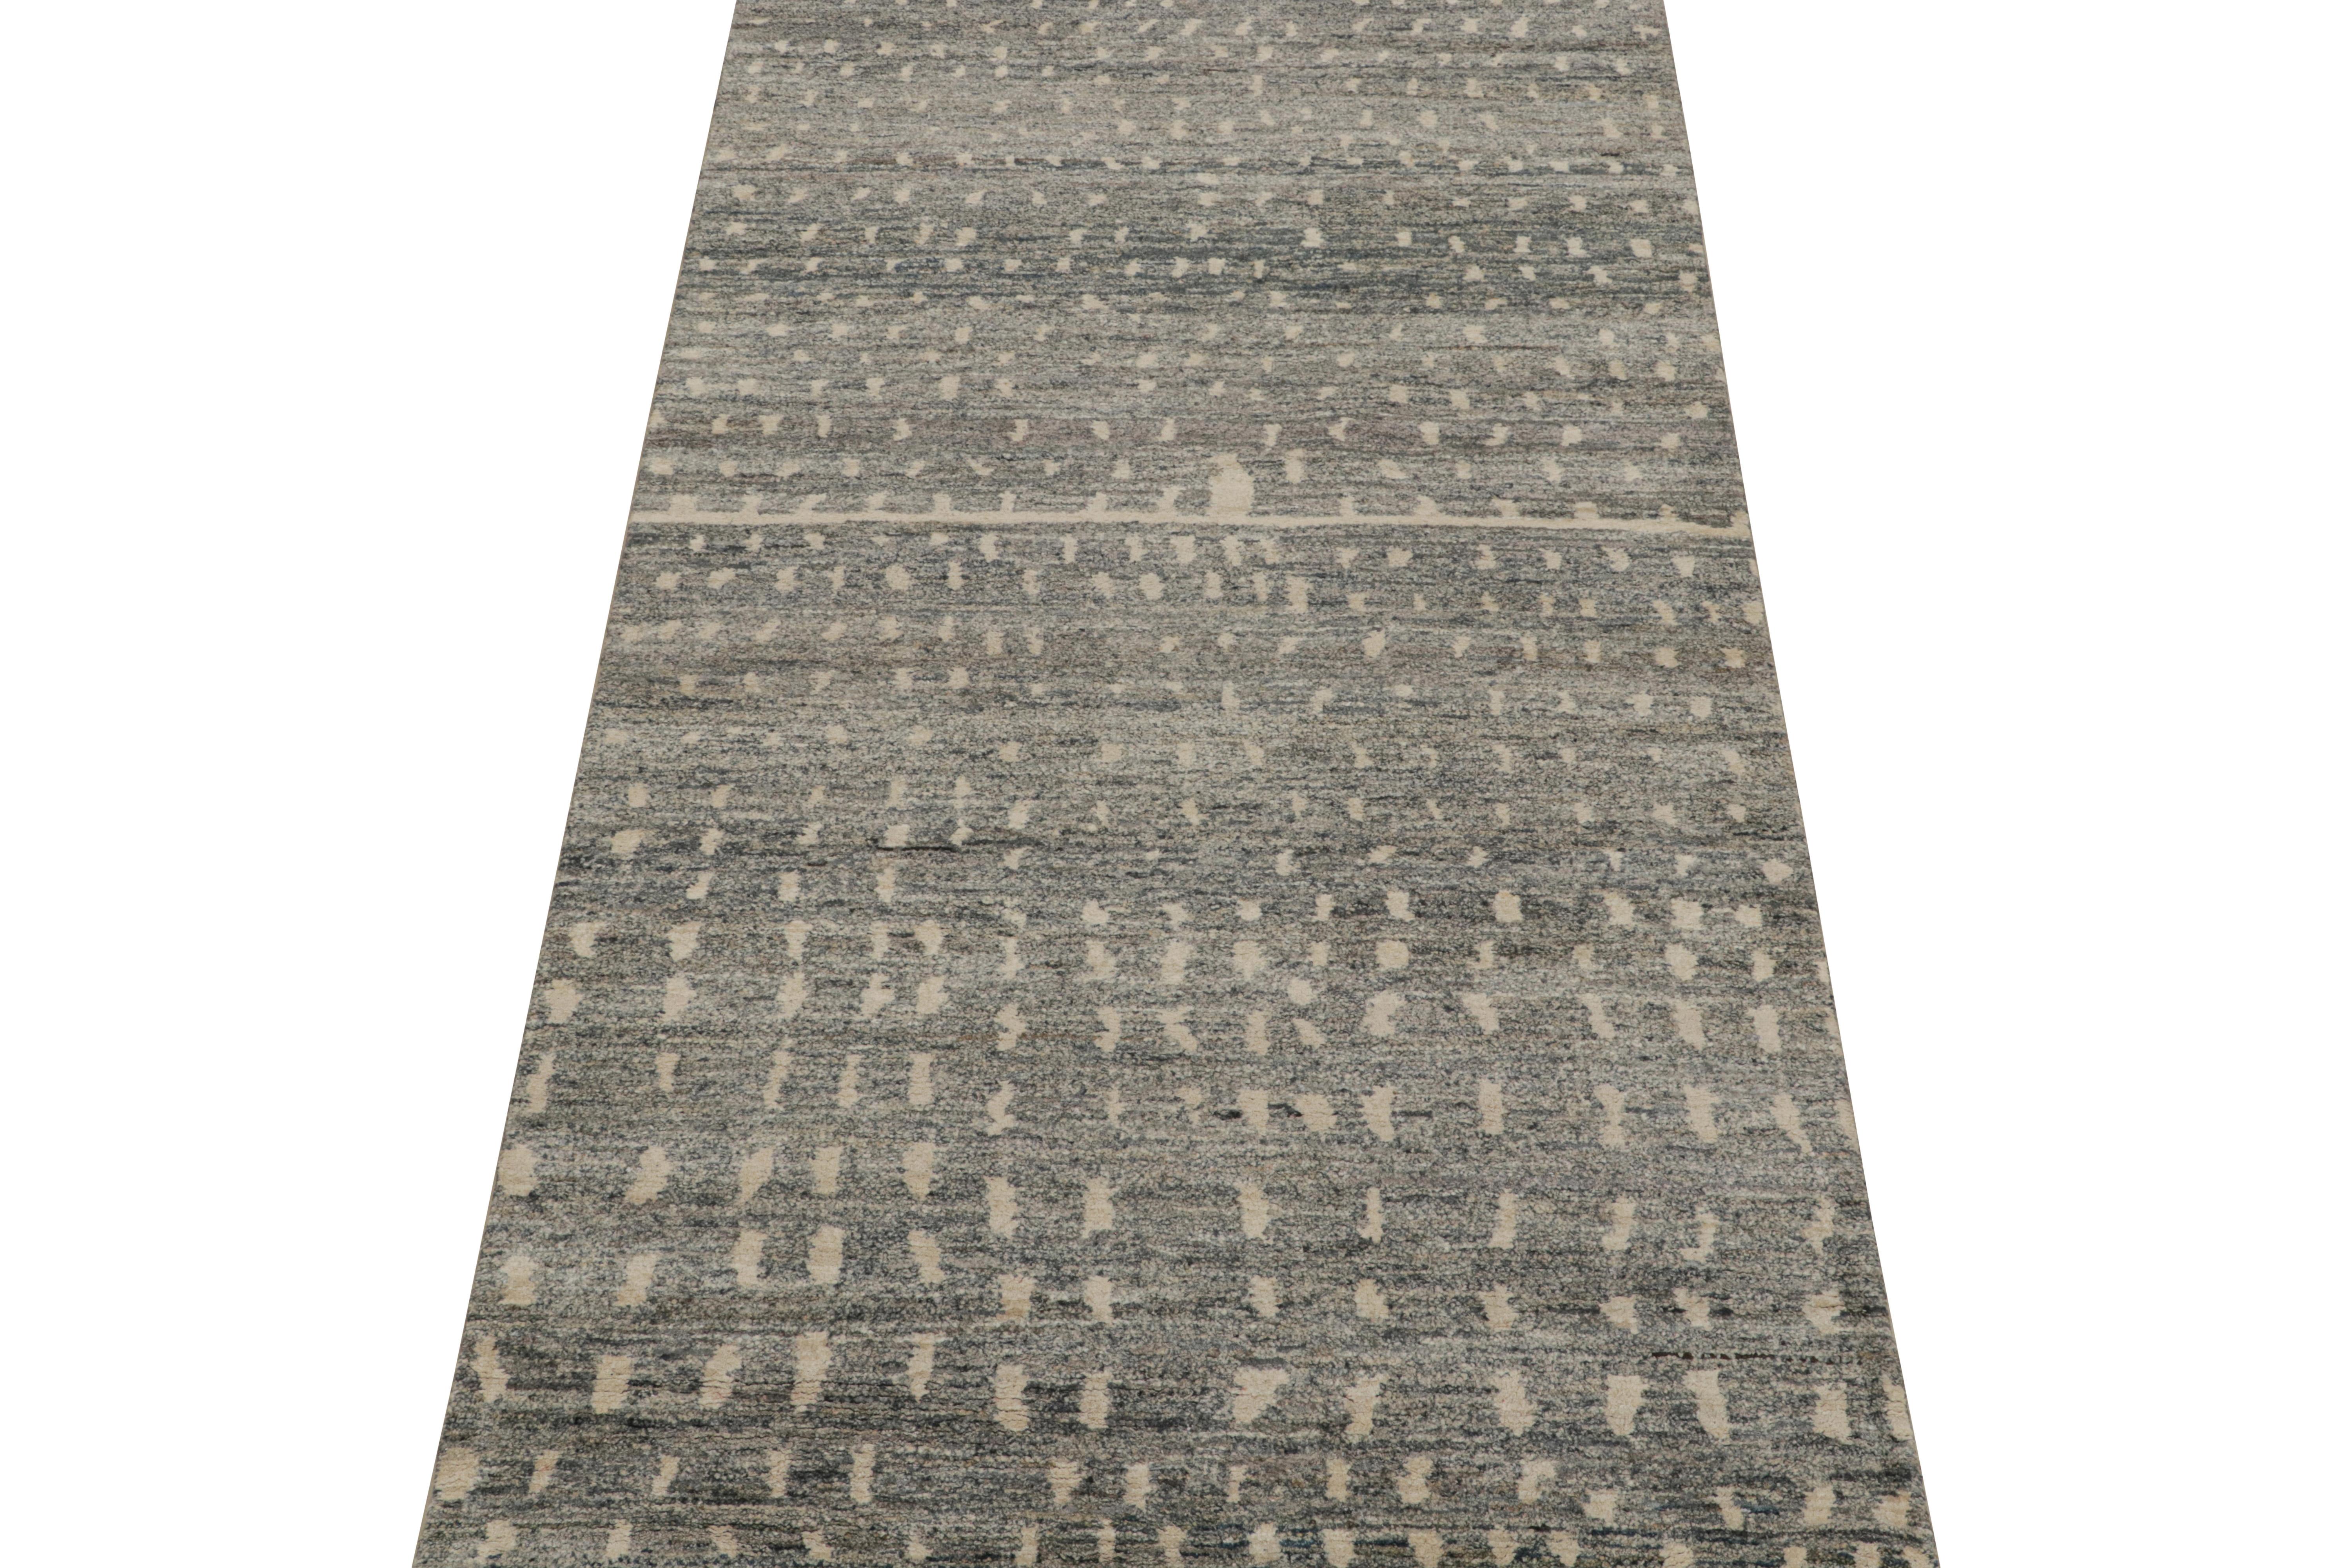 Indian Rug & Kilim’s Modern Moroccan Style Rug in Gray and Beige Geometric Patterns For Sale